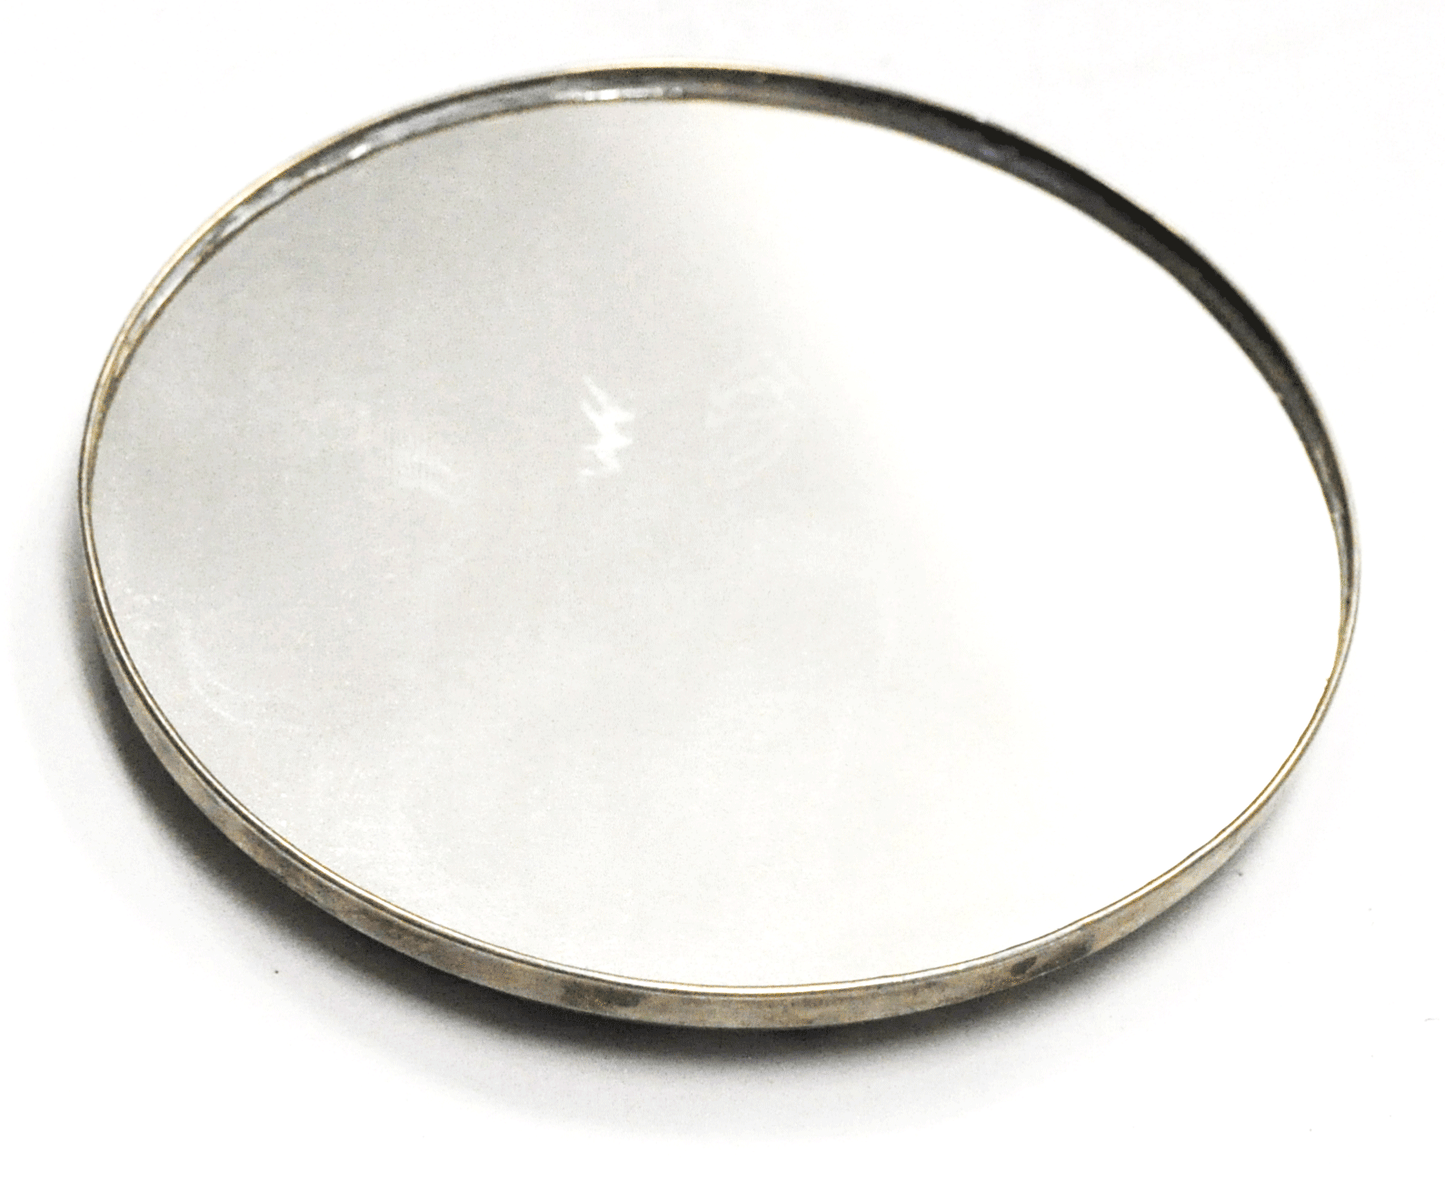 Vintage Silver Plated Compact Mirror Scroll Pattern 3-1/4"